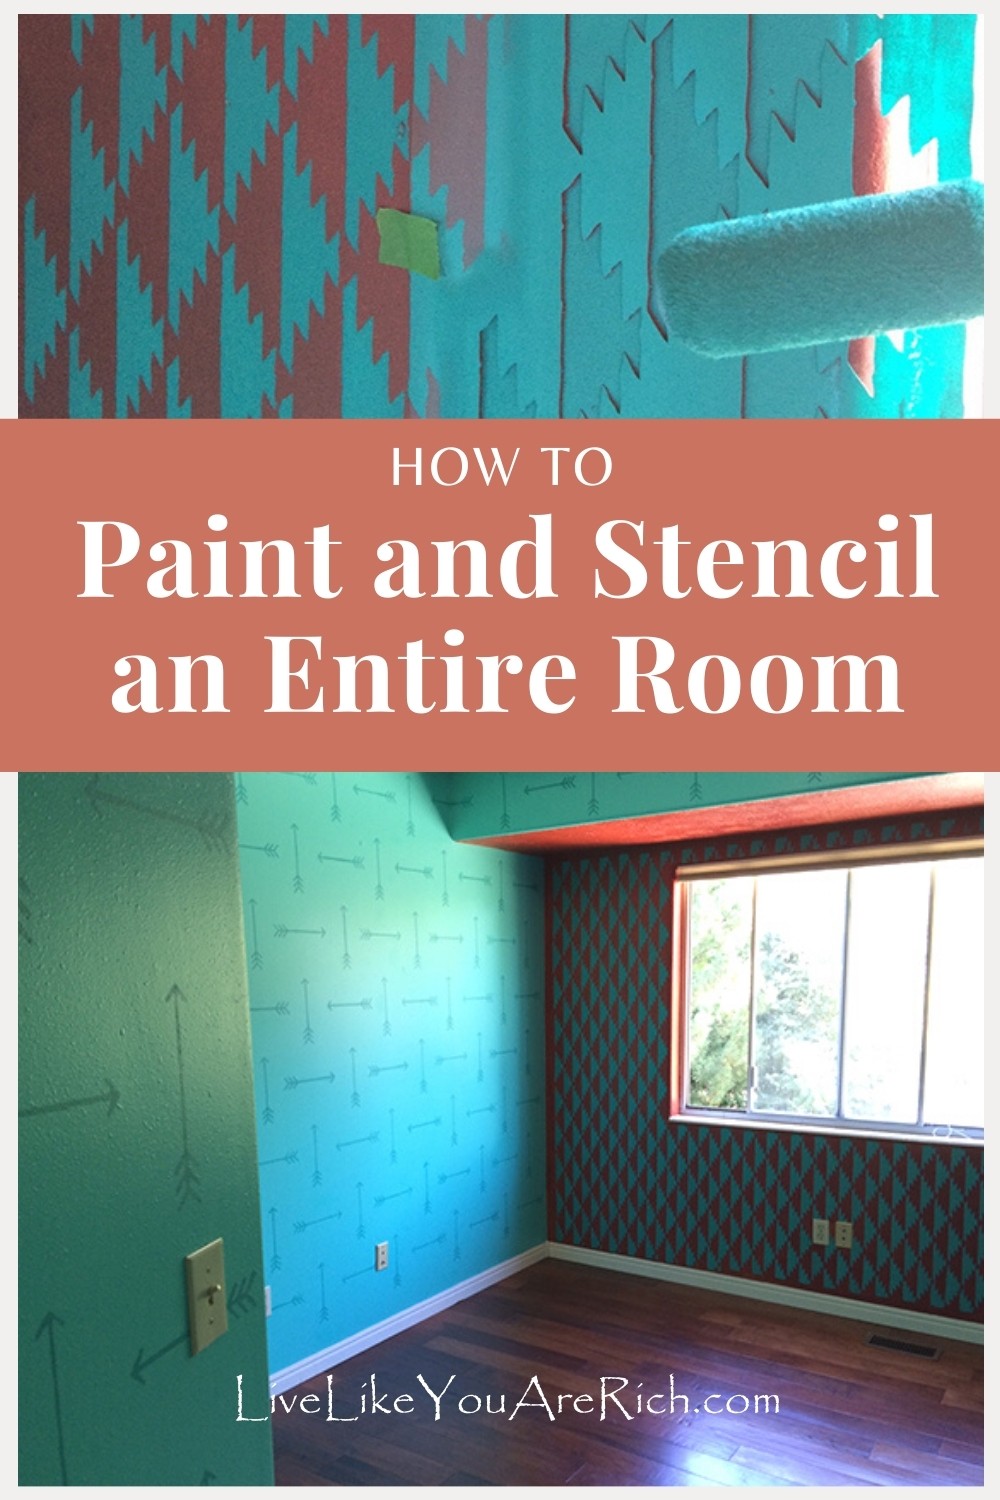 There are a lot of things you can do to make painting and stenciling more convenient, efficient, and not as messy. Here are 11 steps to take to paint and stencil an entire room.